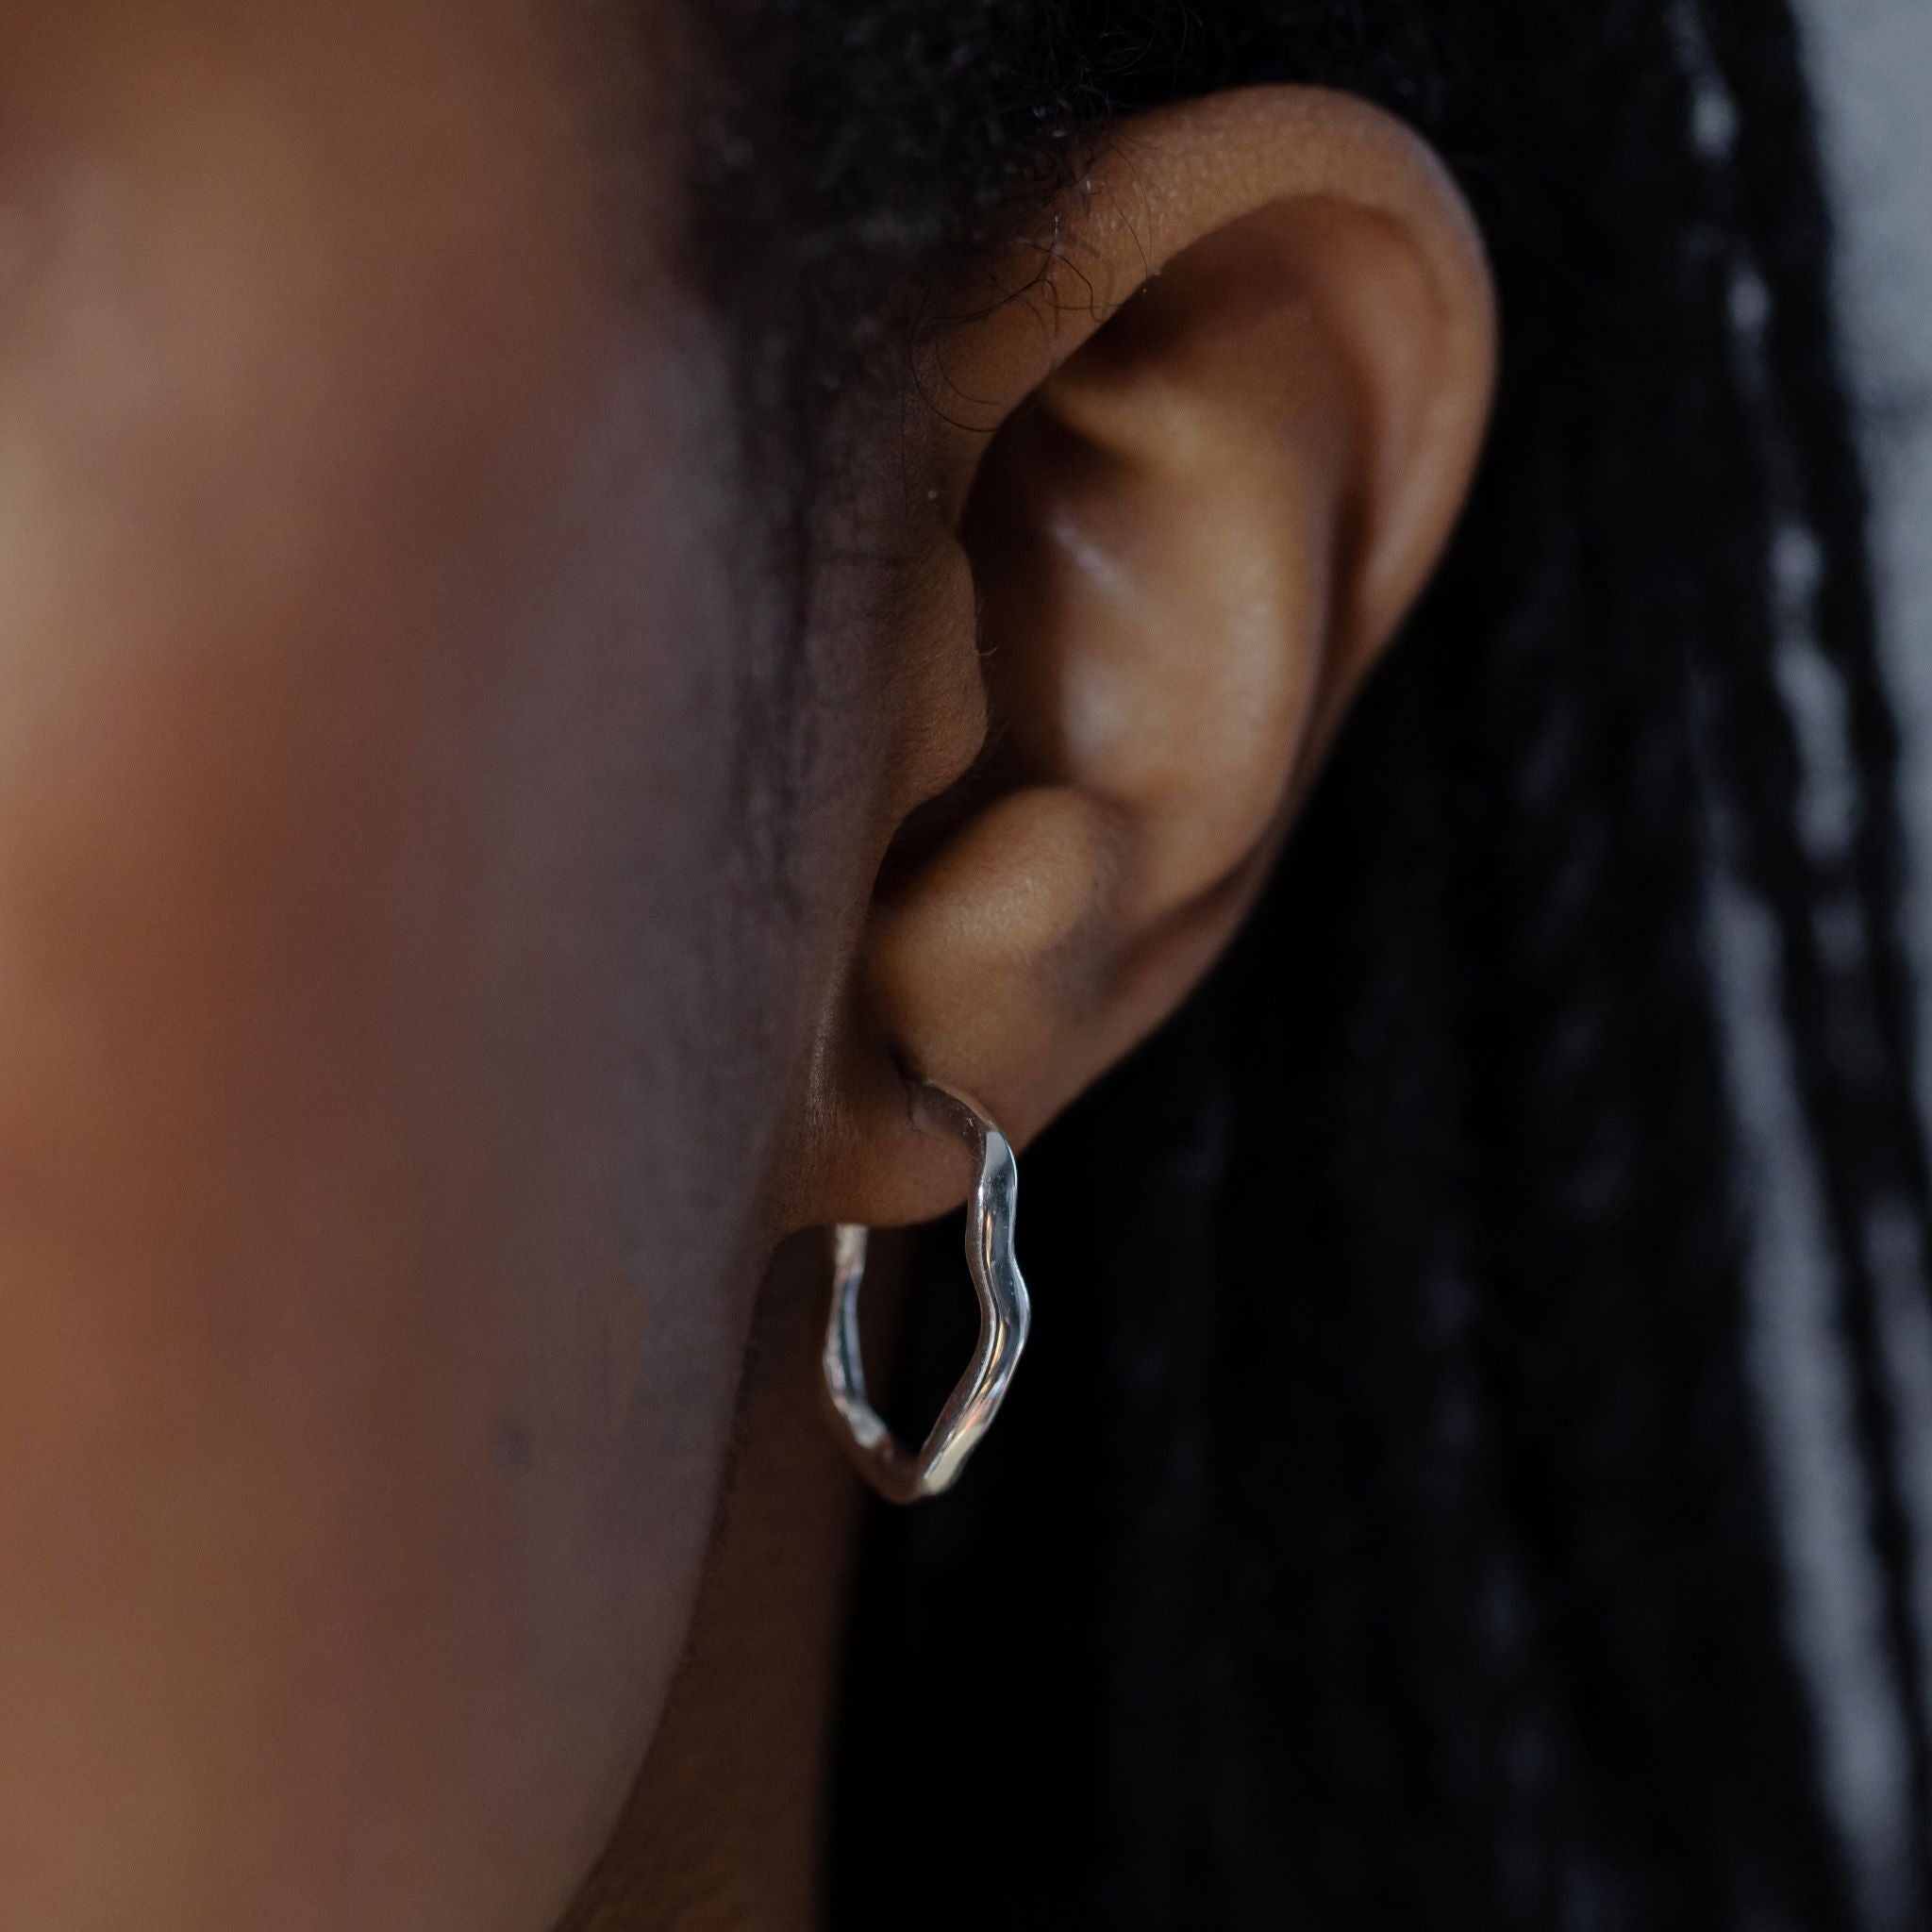 Earrings features a handcut natural ripple shape and is crafted from sterling silver or 18ct gold vermeil.